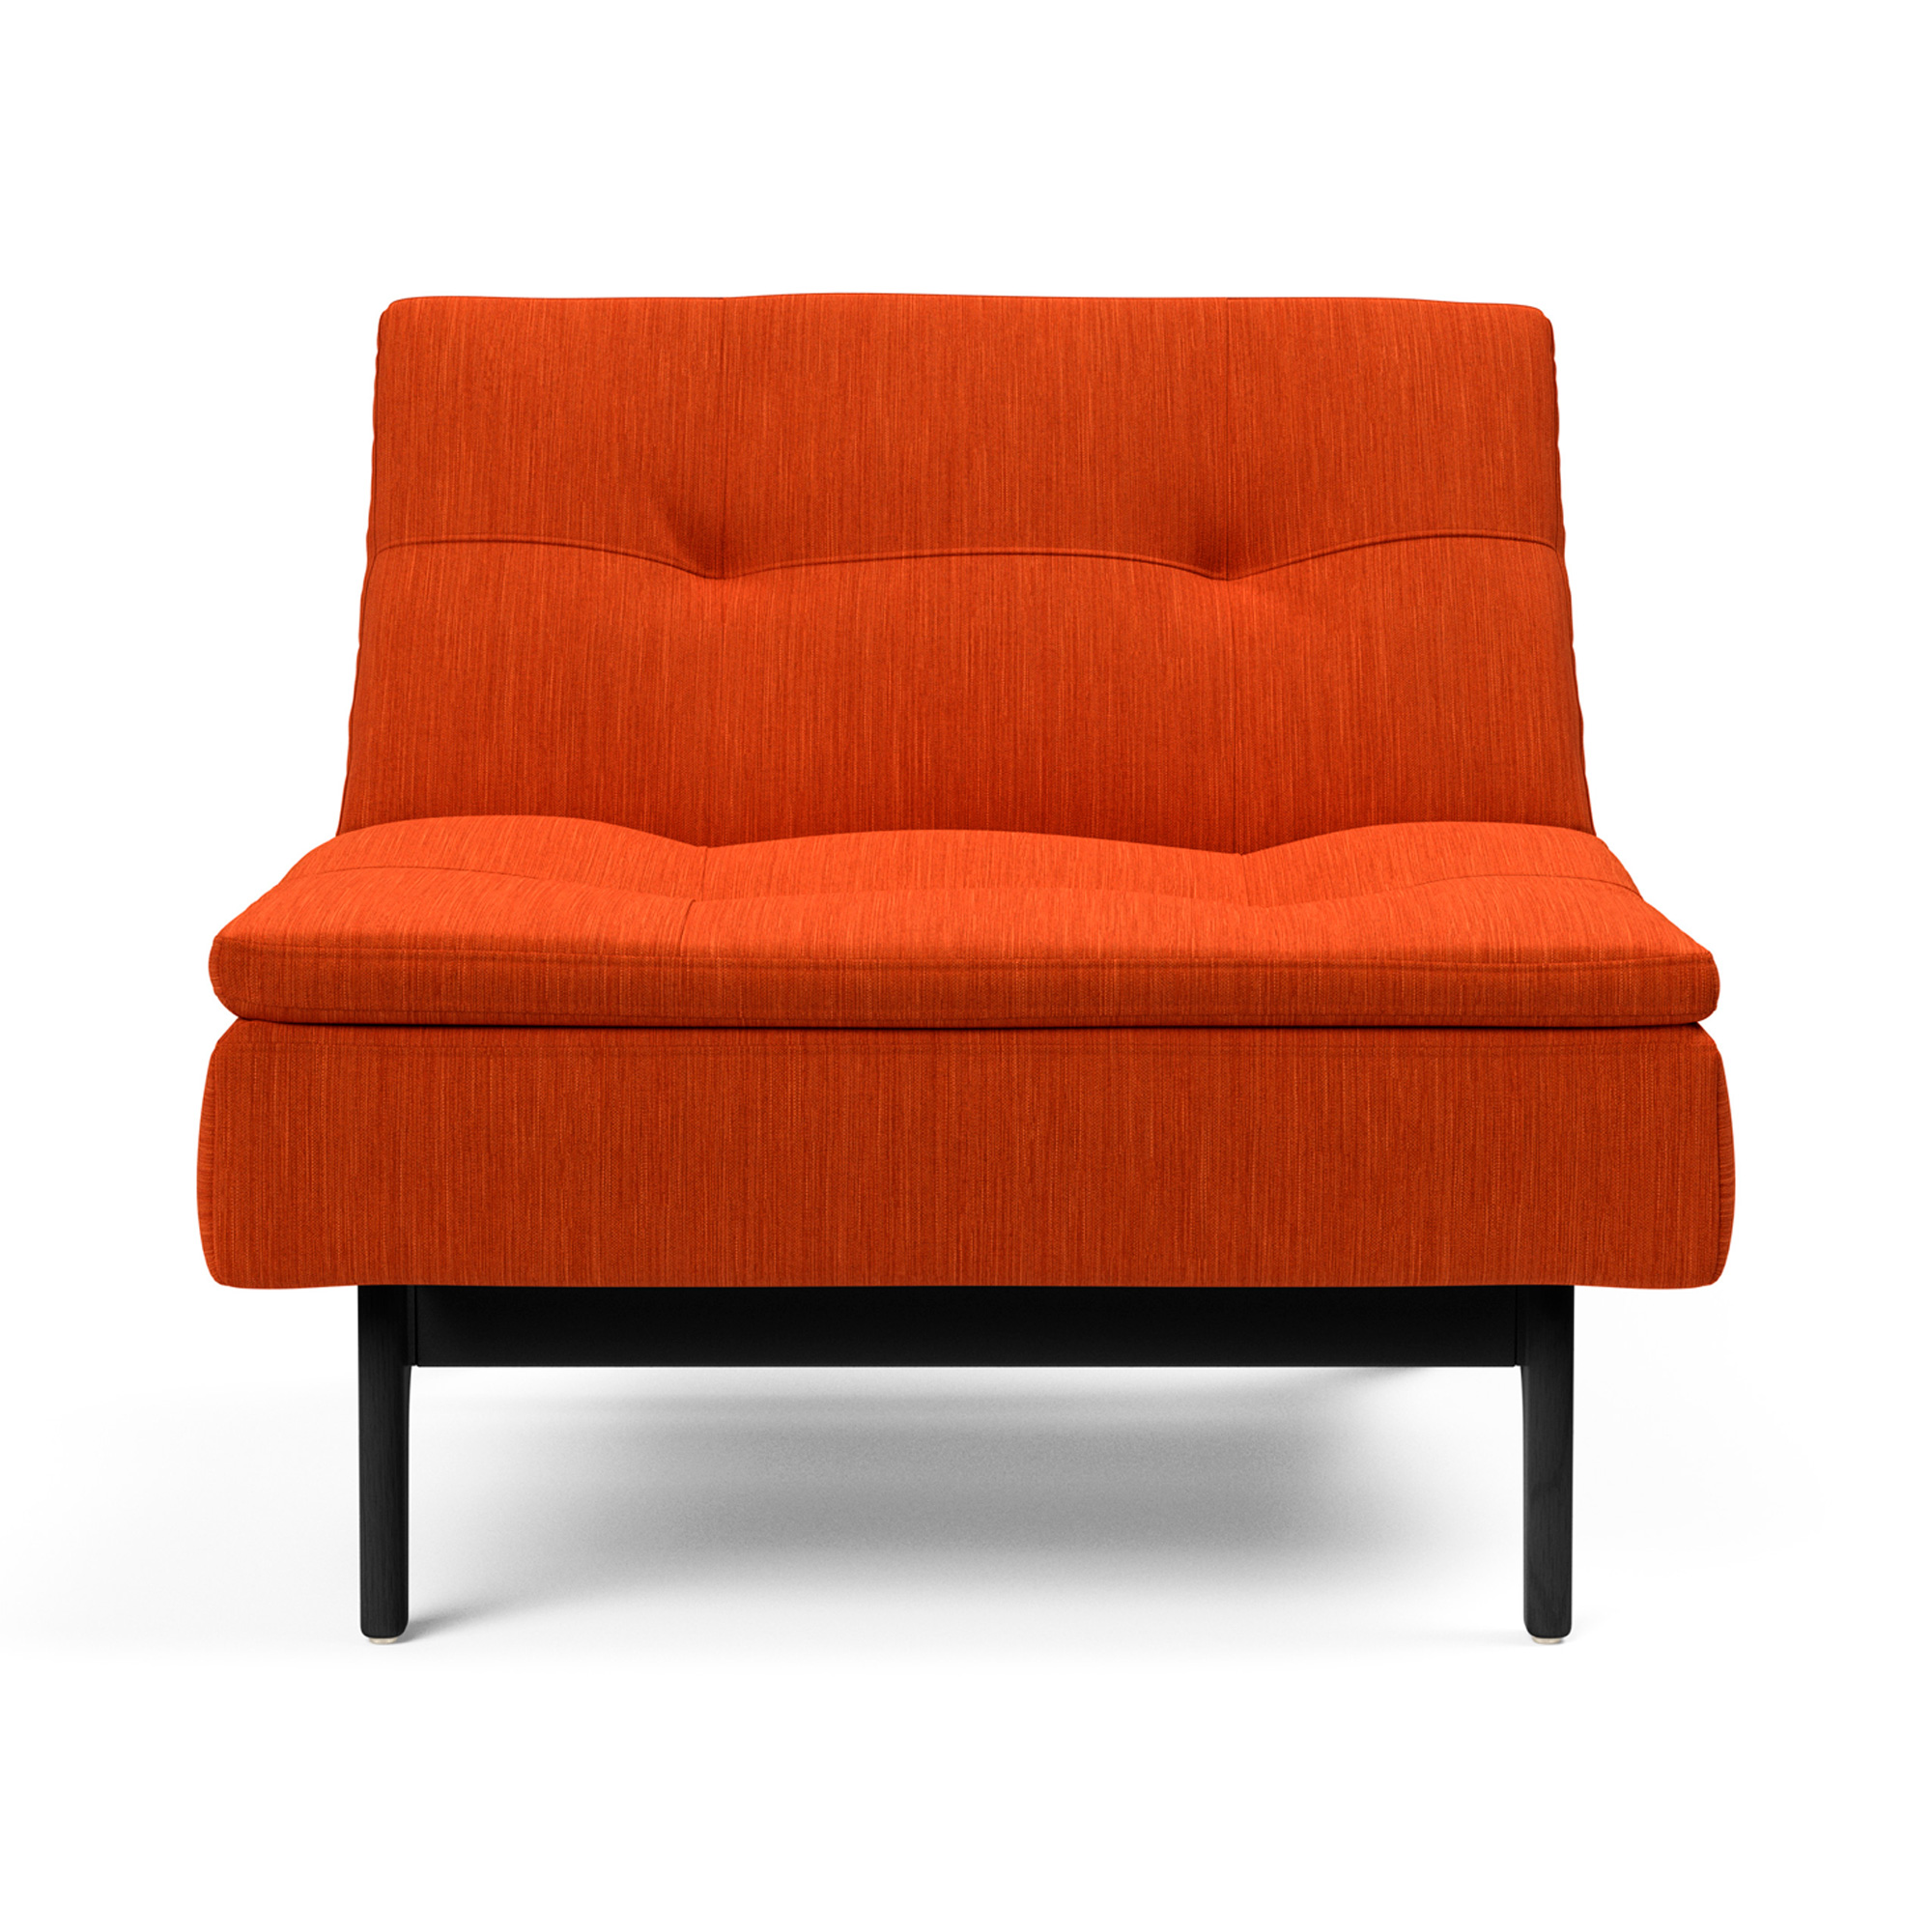 Dublexo Eik Sleeper Chair with Lacquered Oak Legs in Paprika Fabric in ...